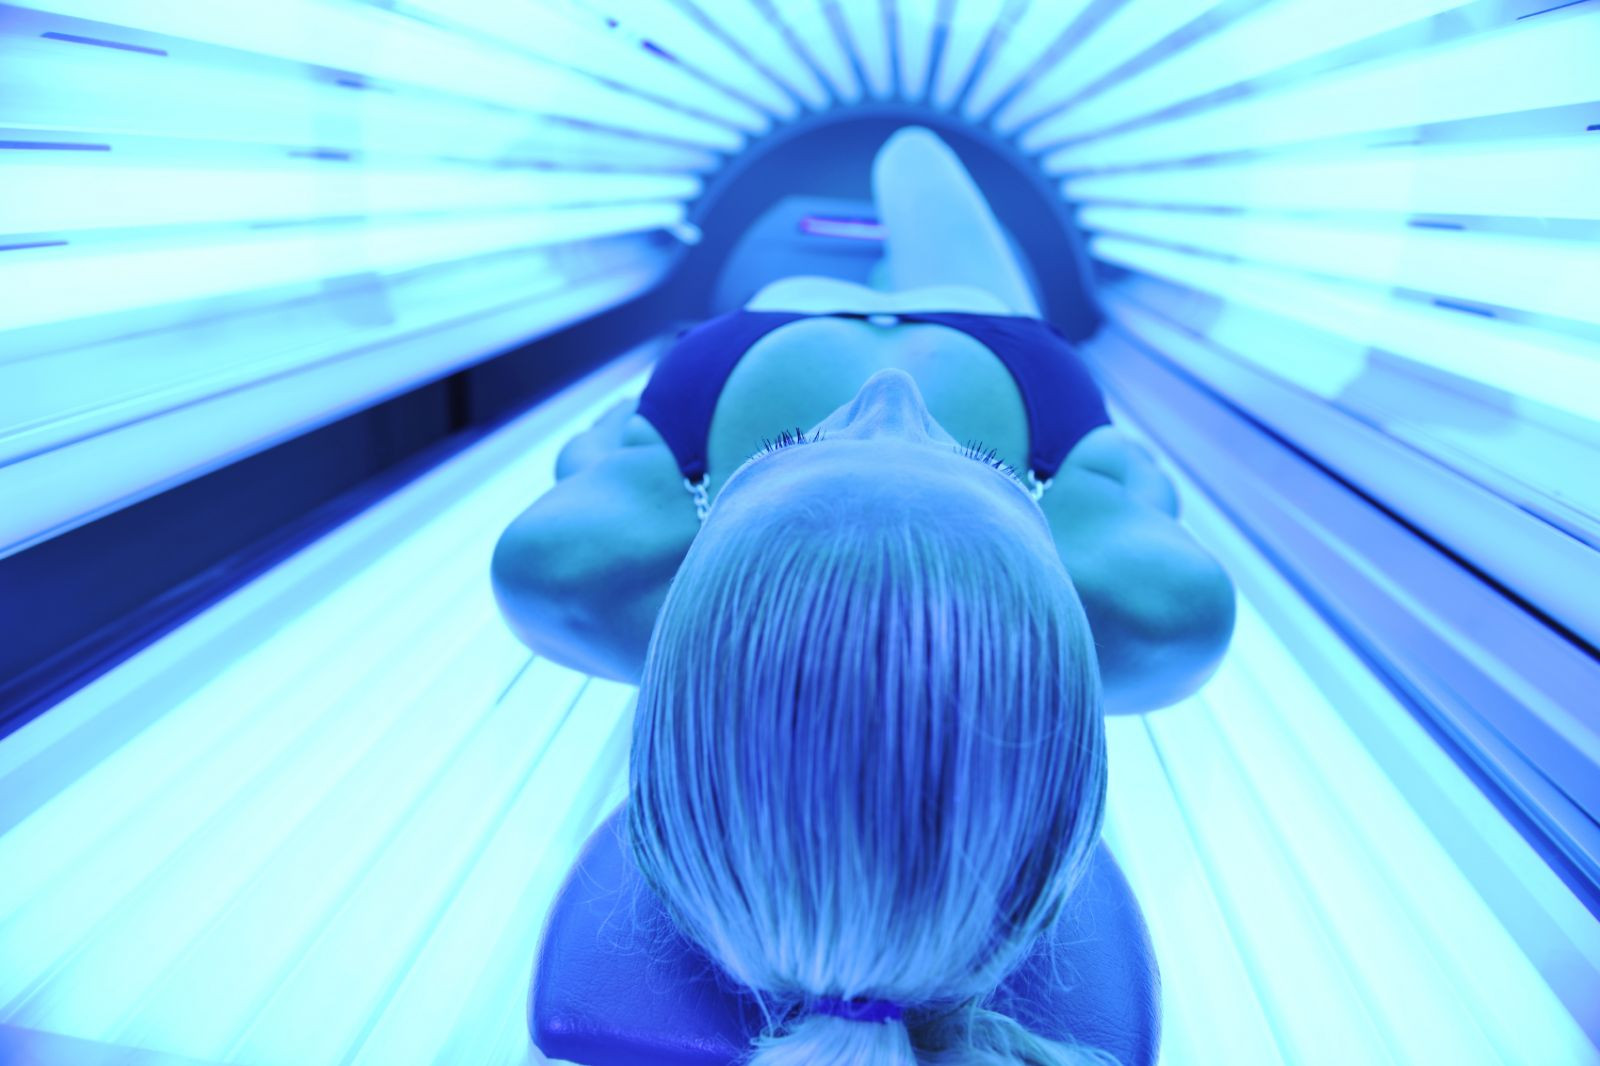 How to Tan Safely and Reduce Skin Cancer Risk